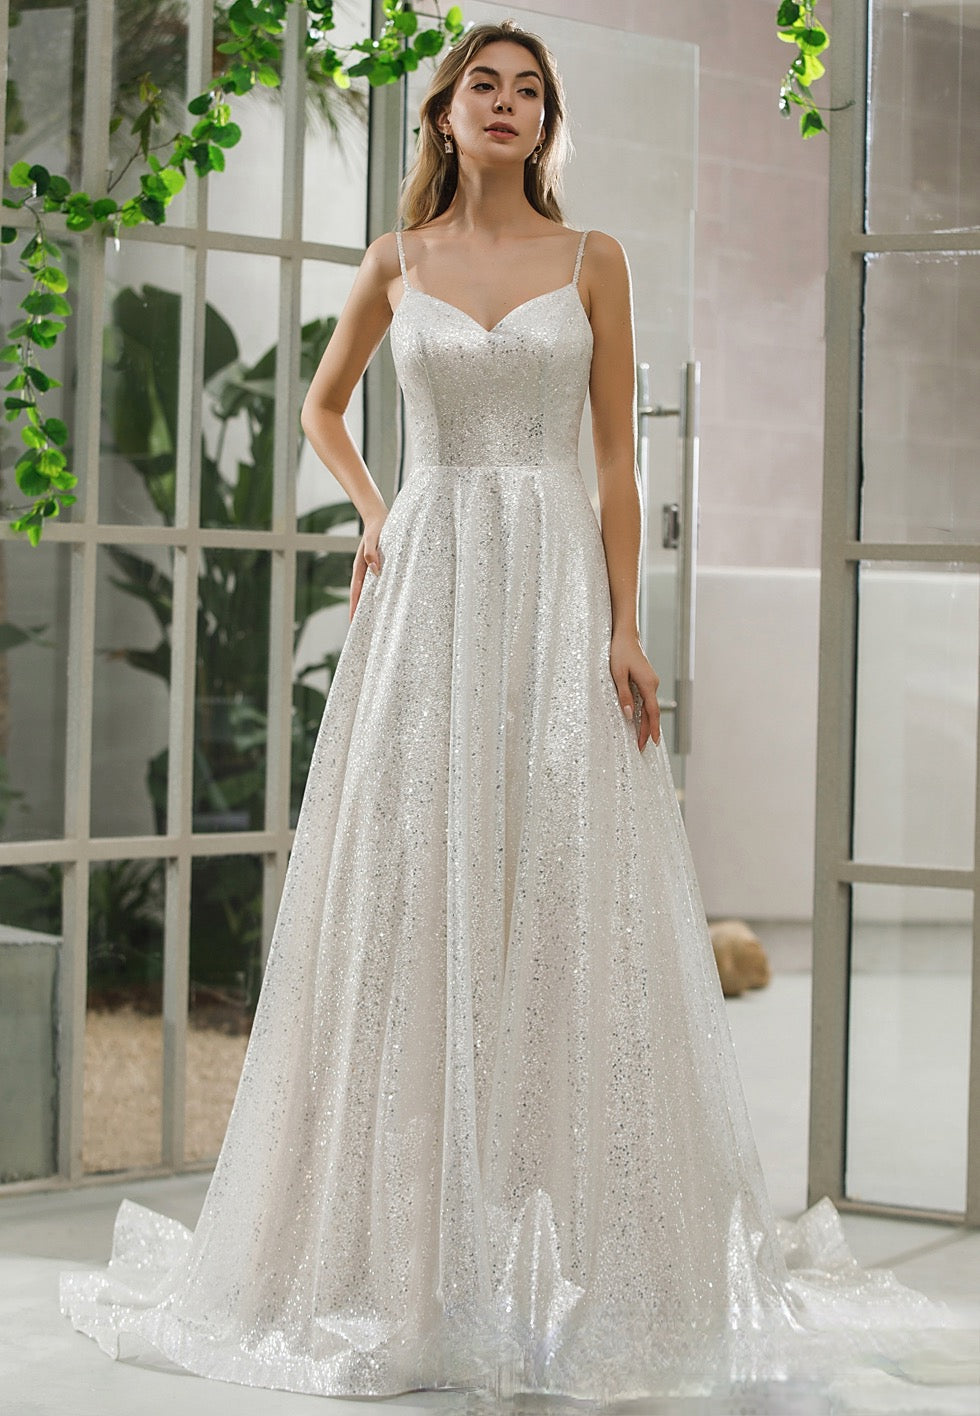 Shimmery Sequined Off-The-Shoulder A-line Bridal Gown